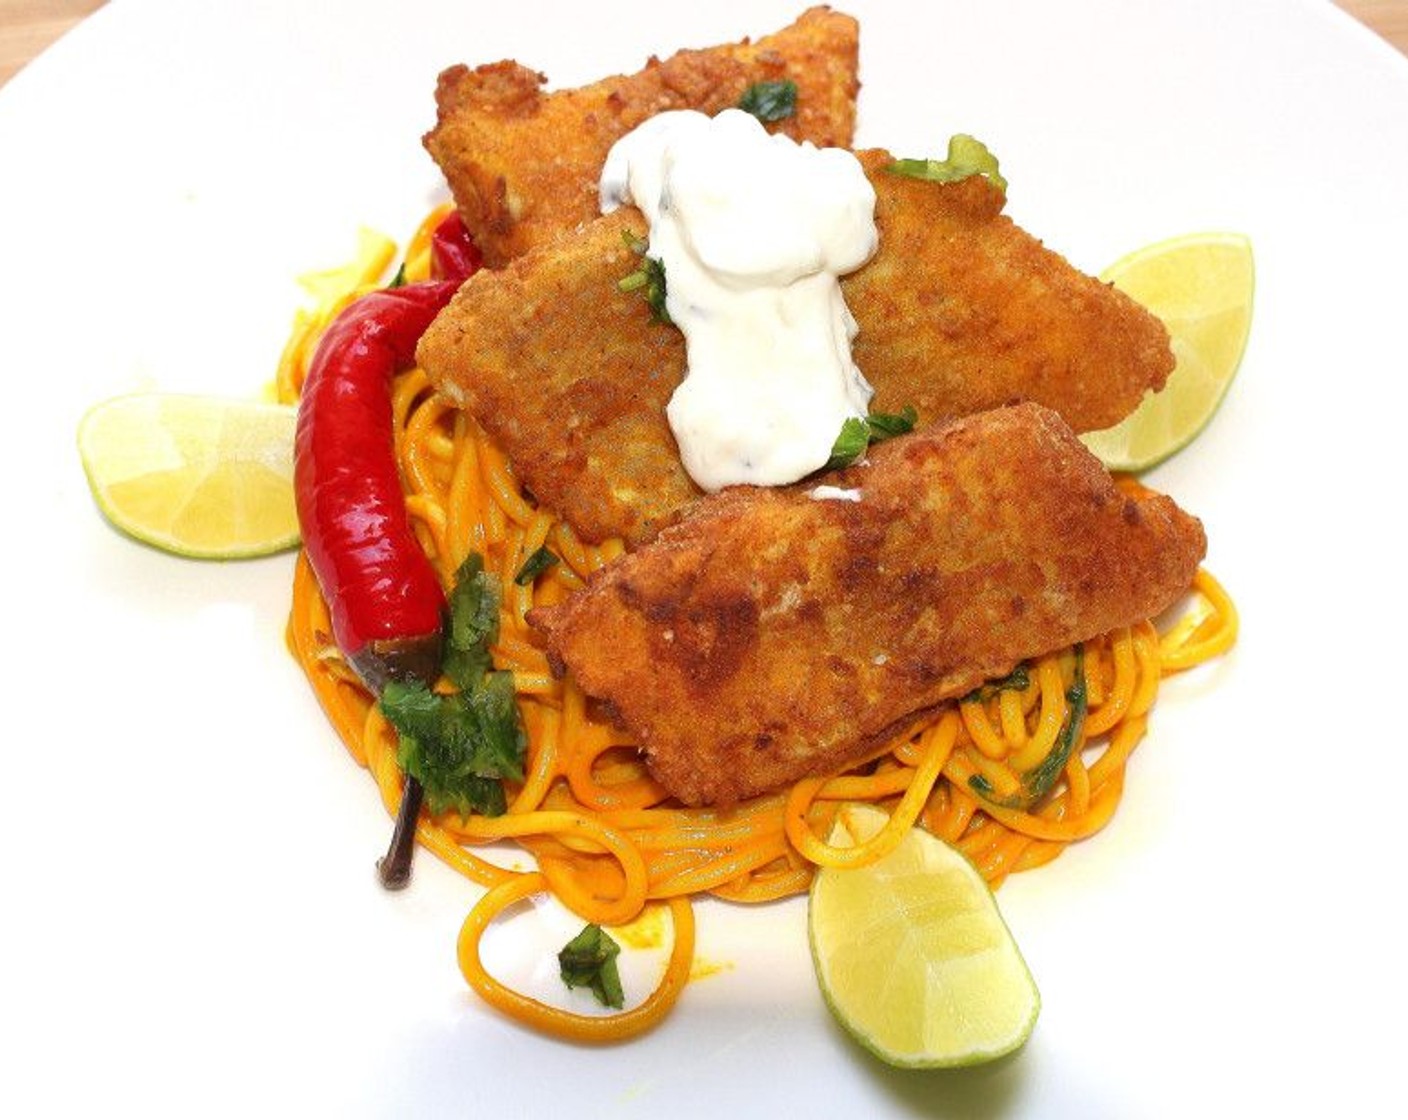 Fried Fish Dabbawalla (Ocean Perch and Curried Noodles)